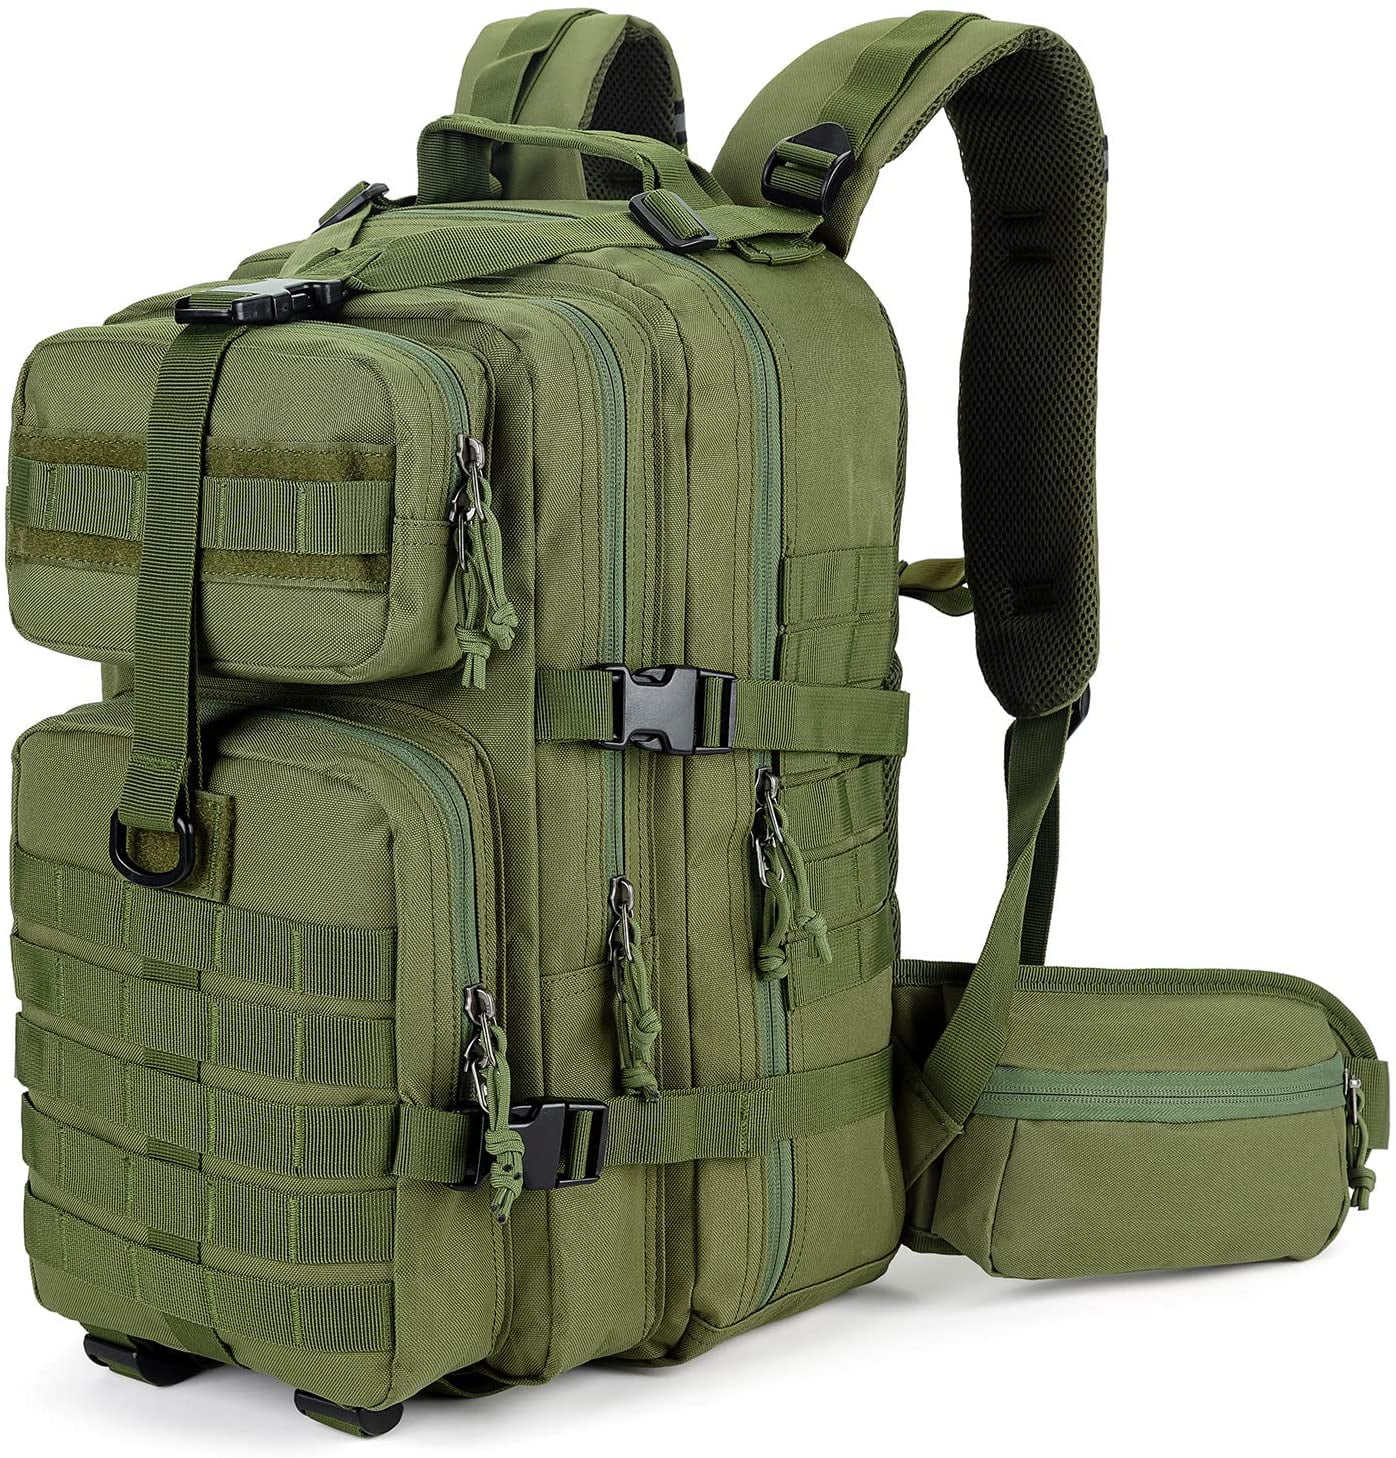 35L Military Tactical Army Rucksack Molle Backpack Camping Hiking USB Port Bag 